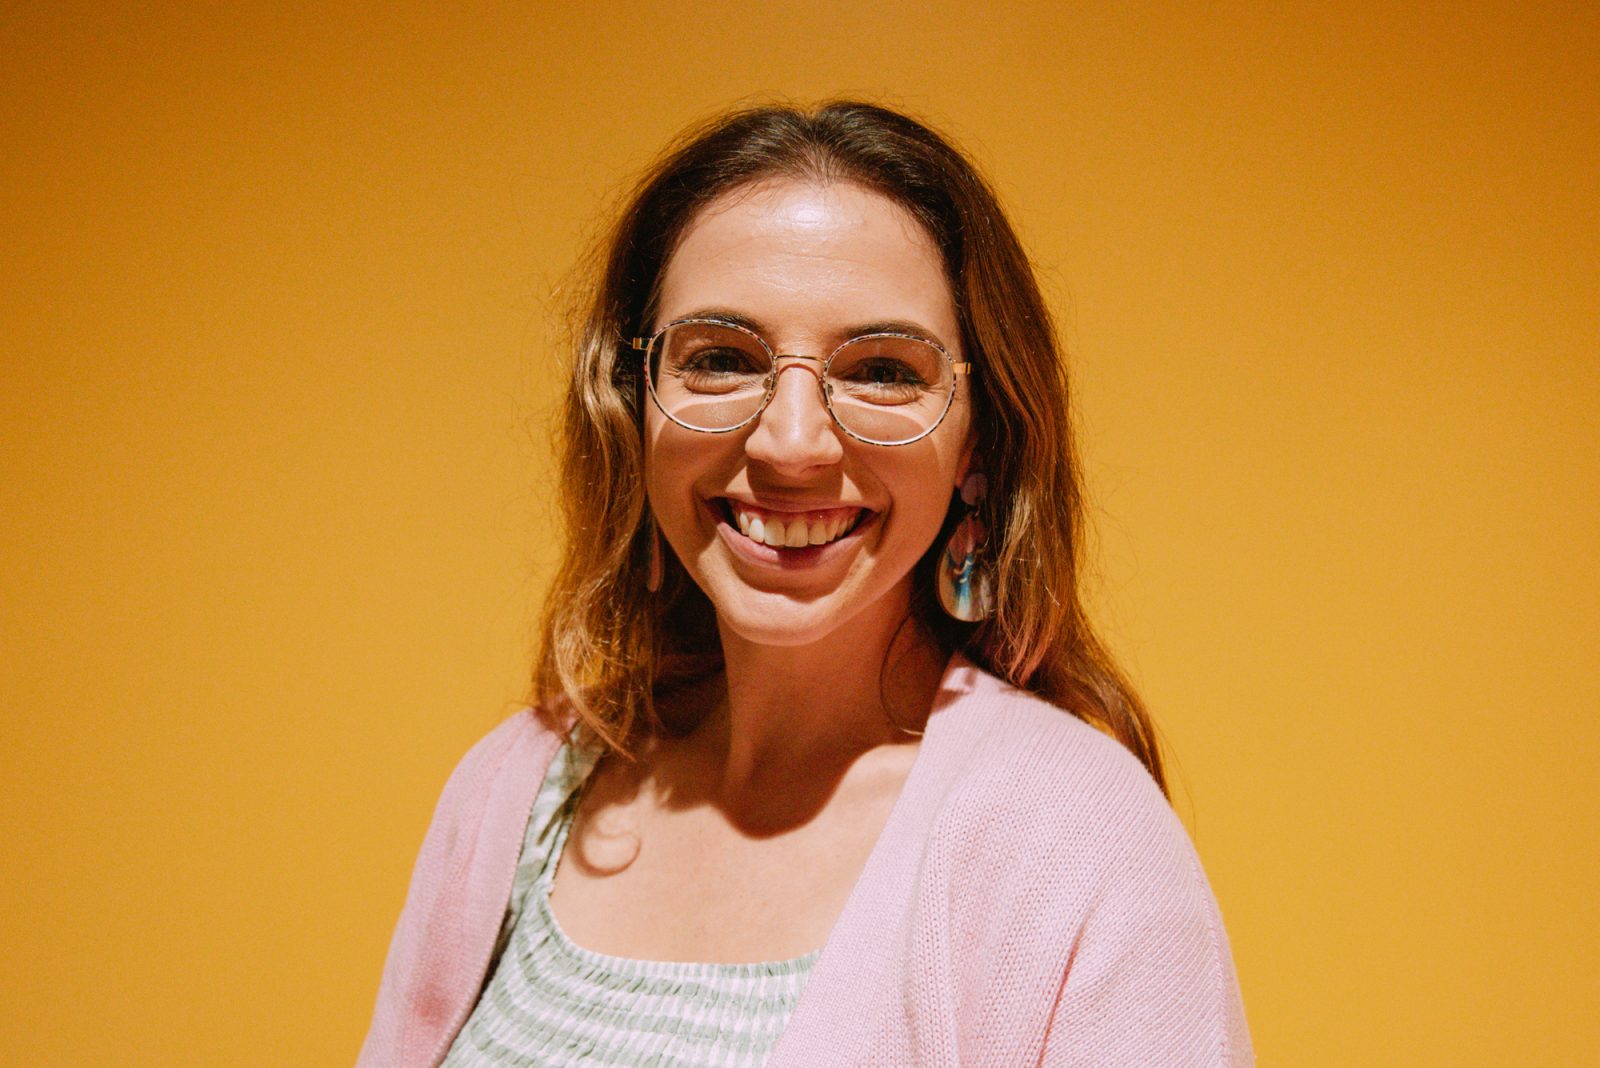 A smiling sophie Jones stands in front of a yellow background. Sophie has dark blonde hair wearing glasses and a pink cardigan.